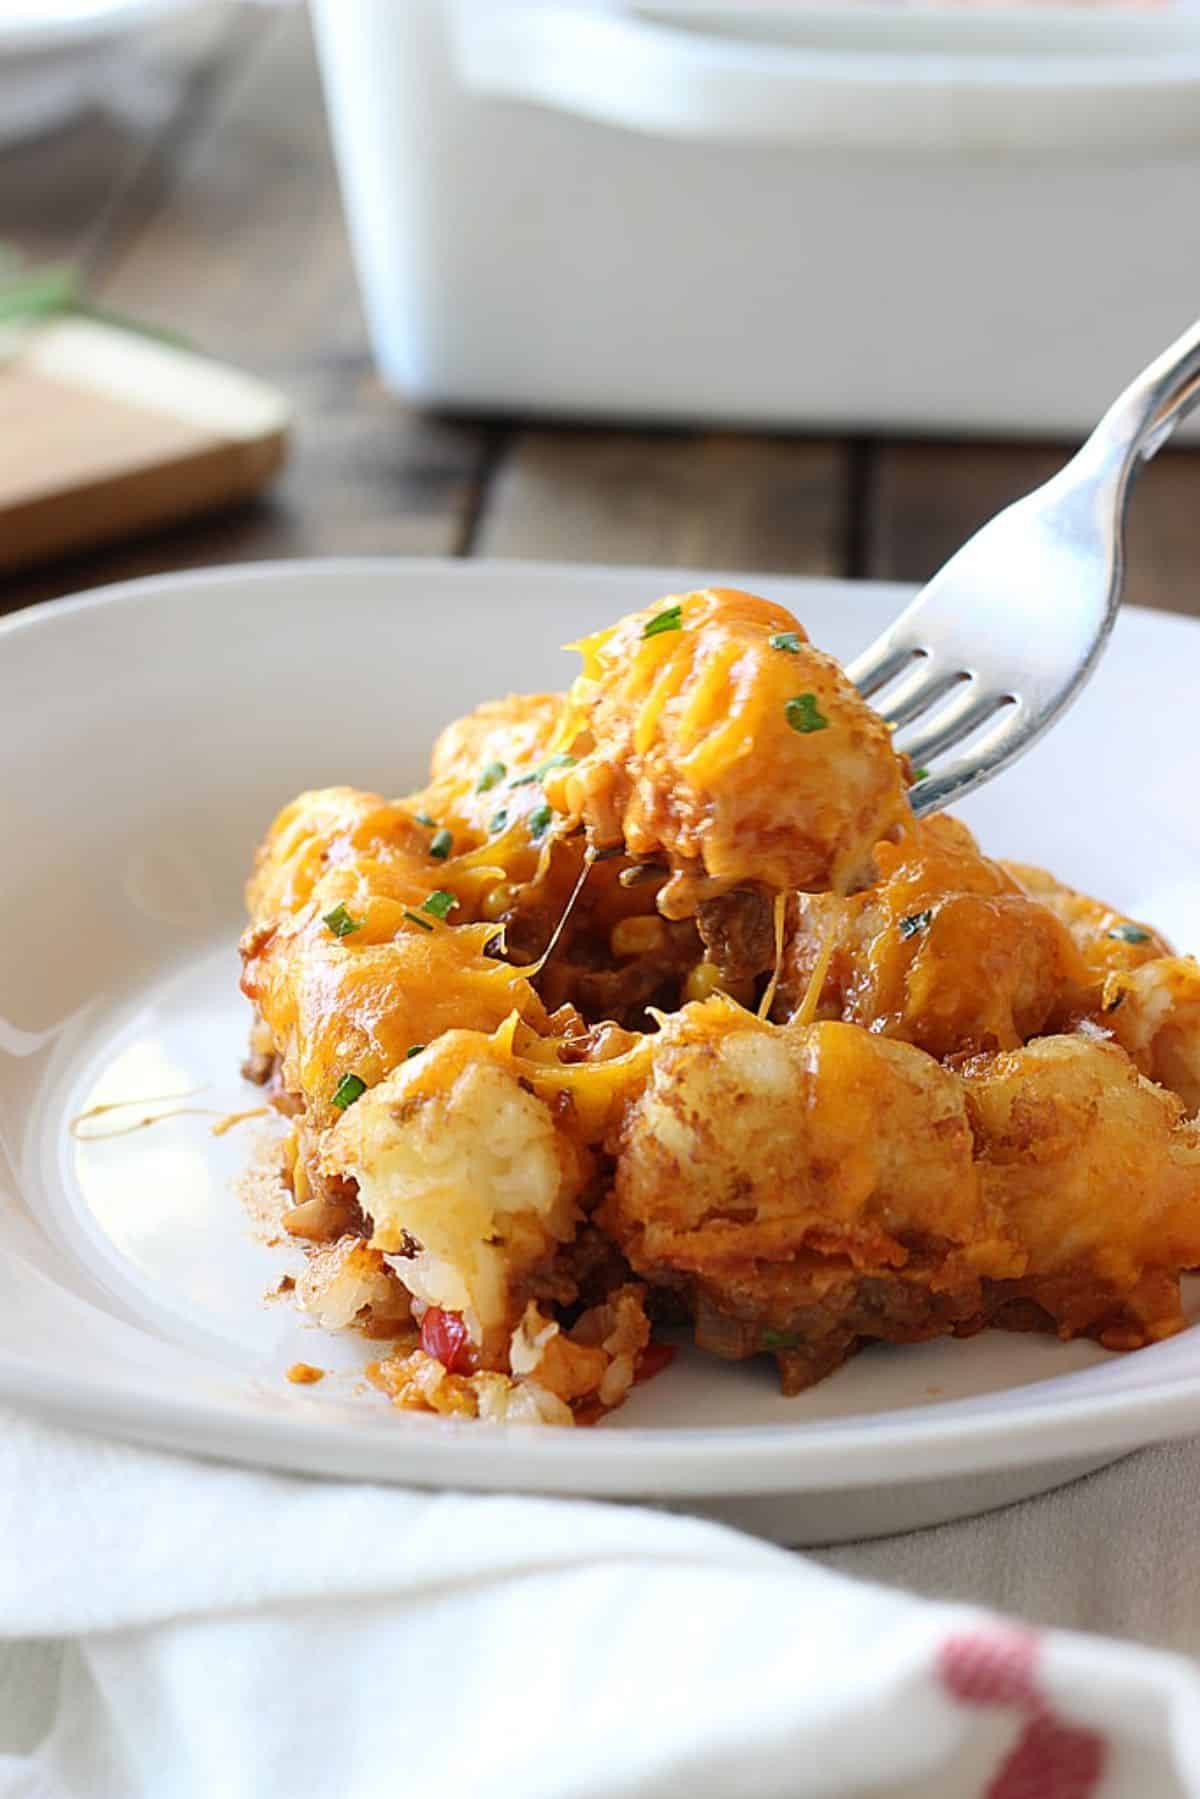 Deliicous sloppy joe tater tots on a white plate picked with a fork.